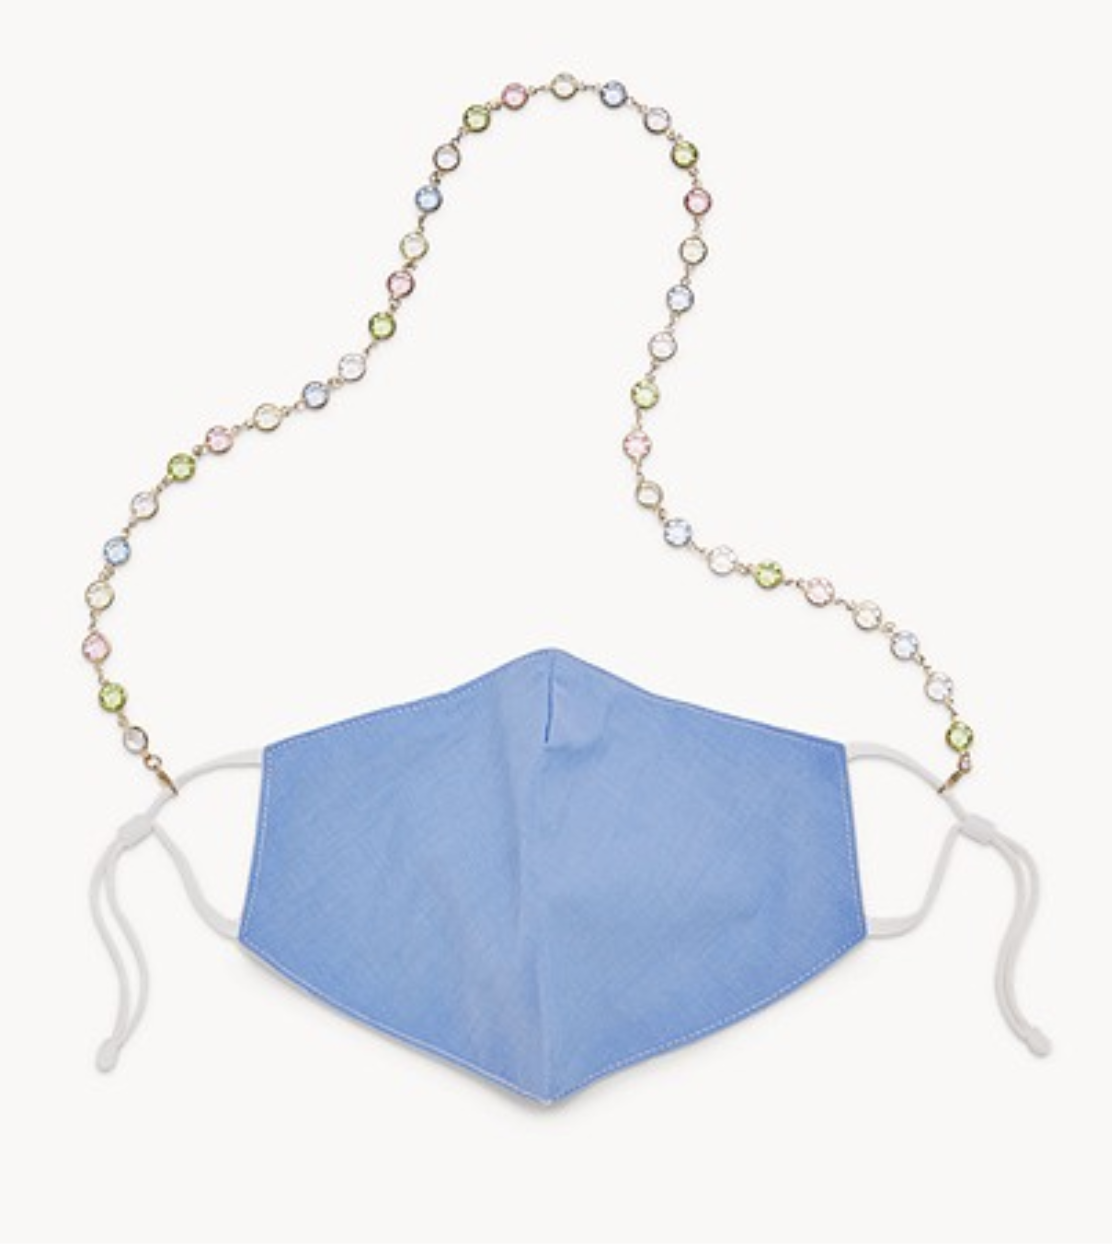 A face mask with gem-like beads in pale green, white, pink, and blue 